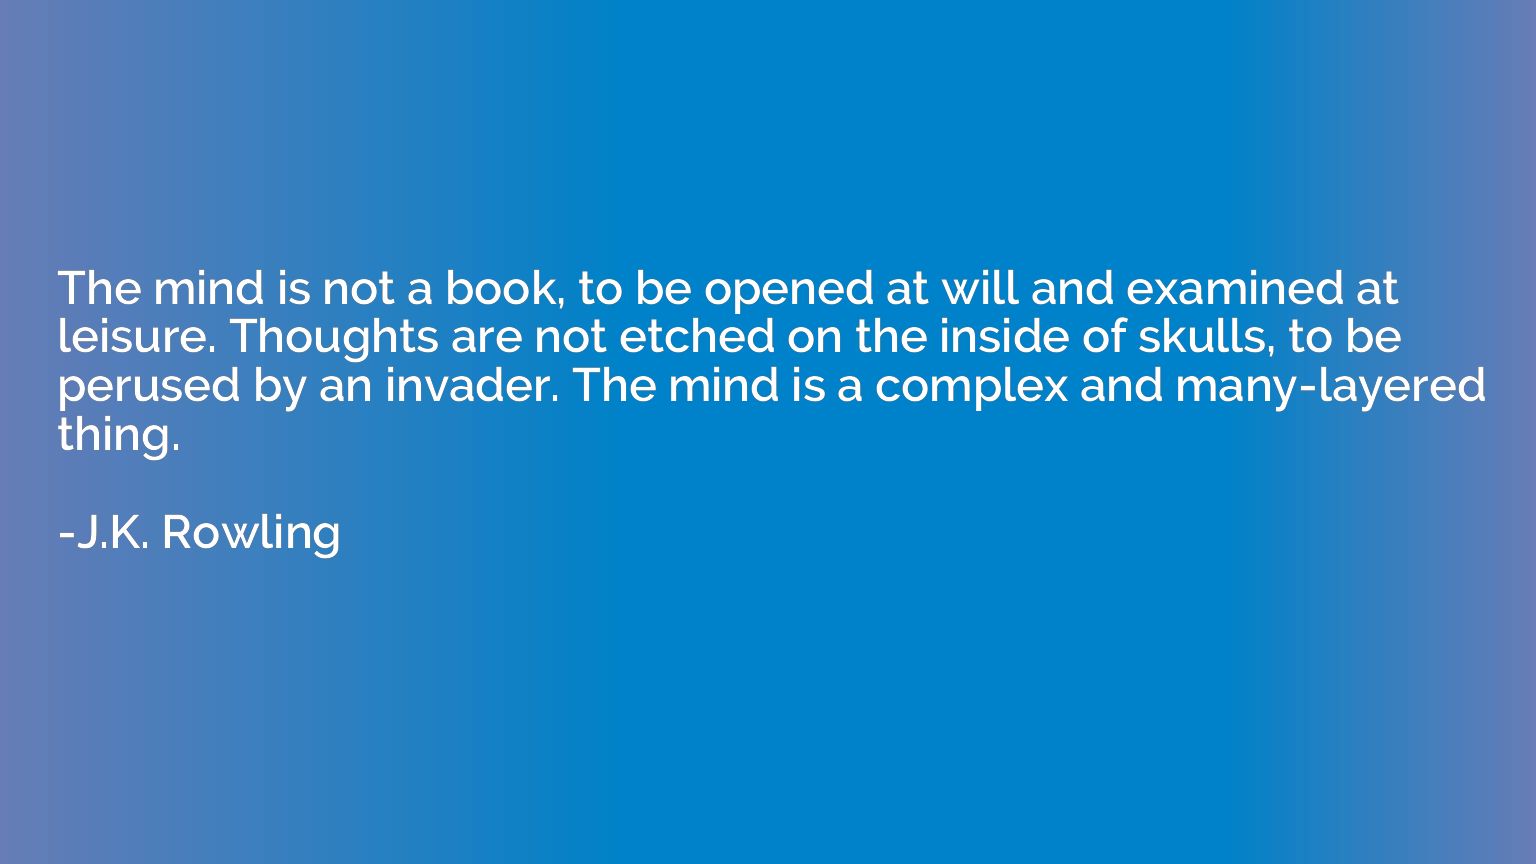 The mind is not a book, to be opened at will and examined at